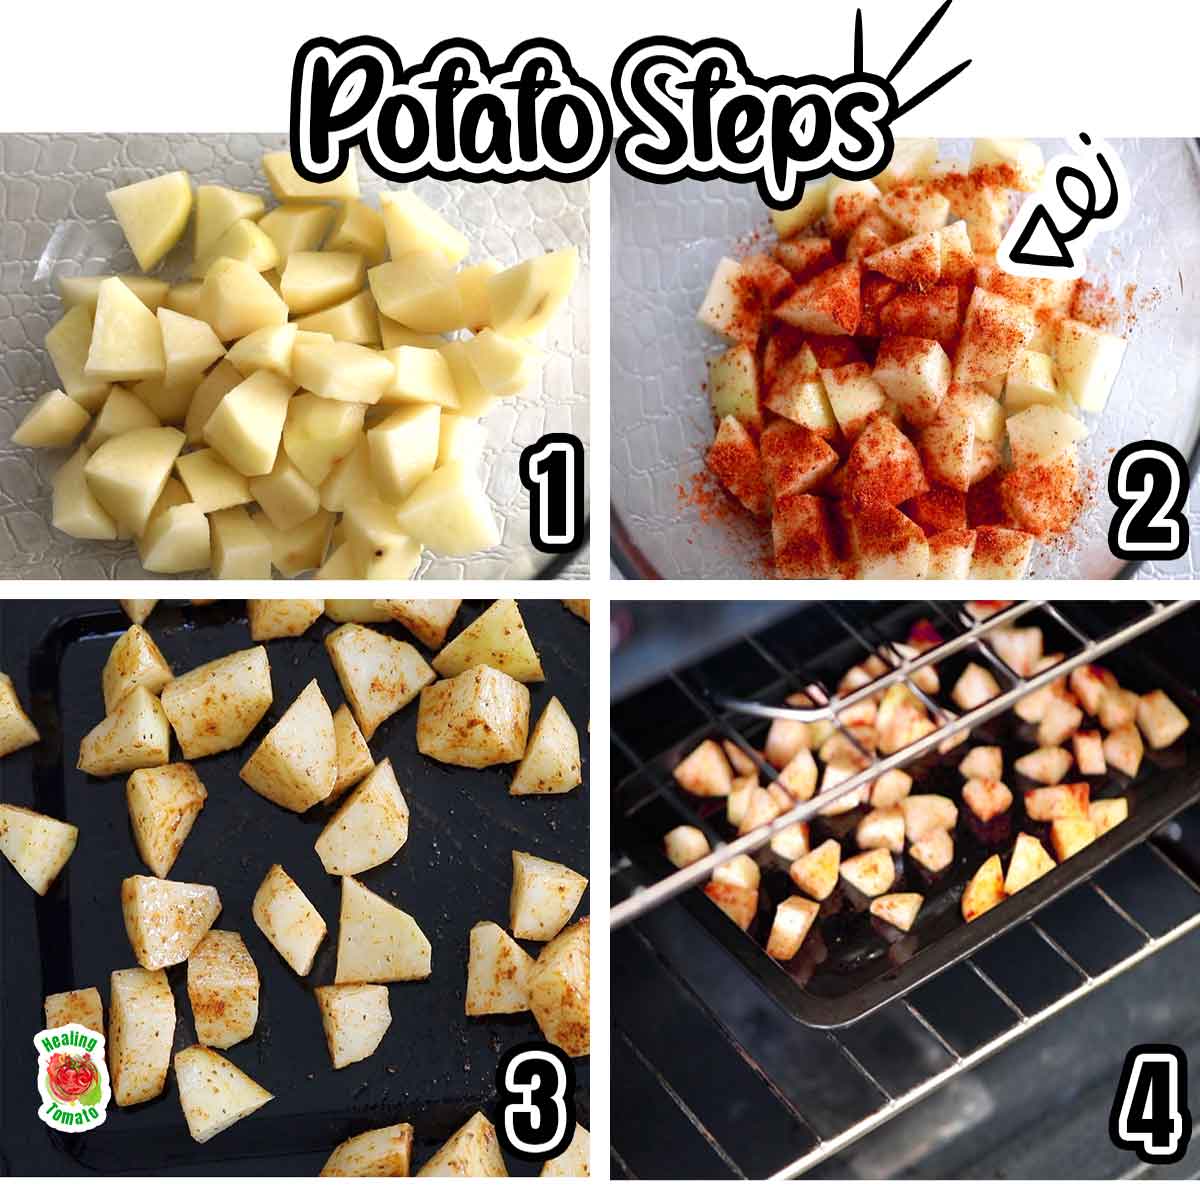 Collage of 4 images showing how to cook the potatoes